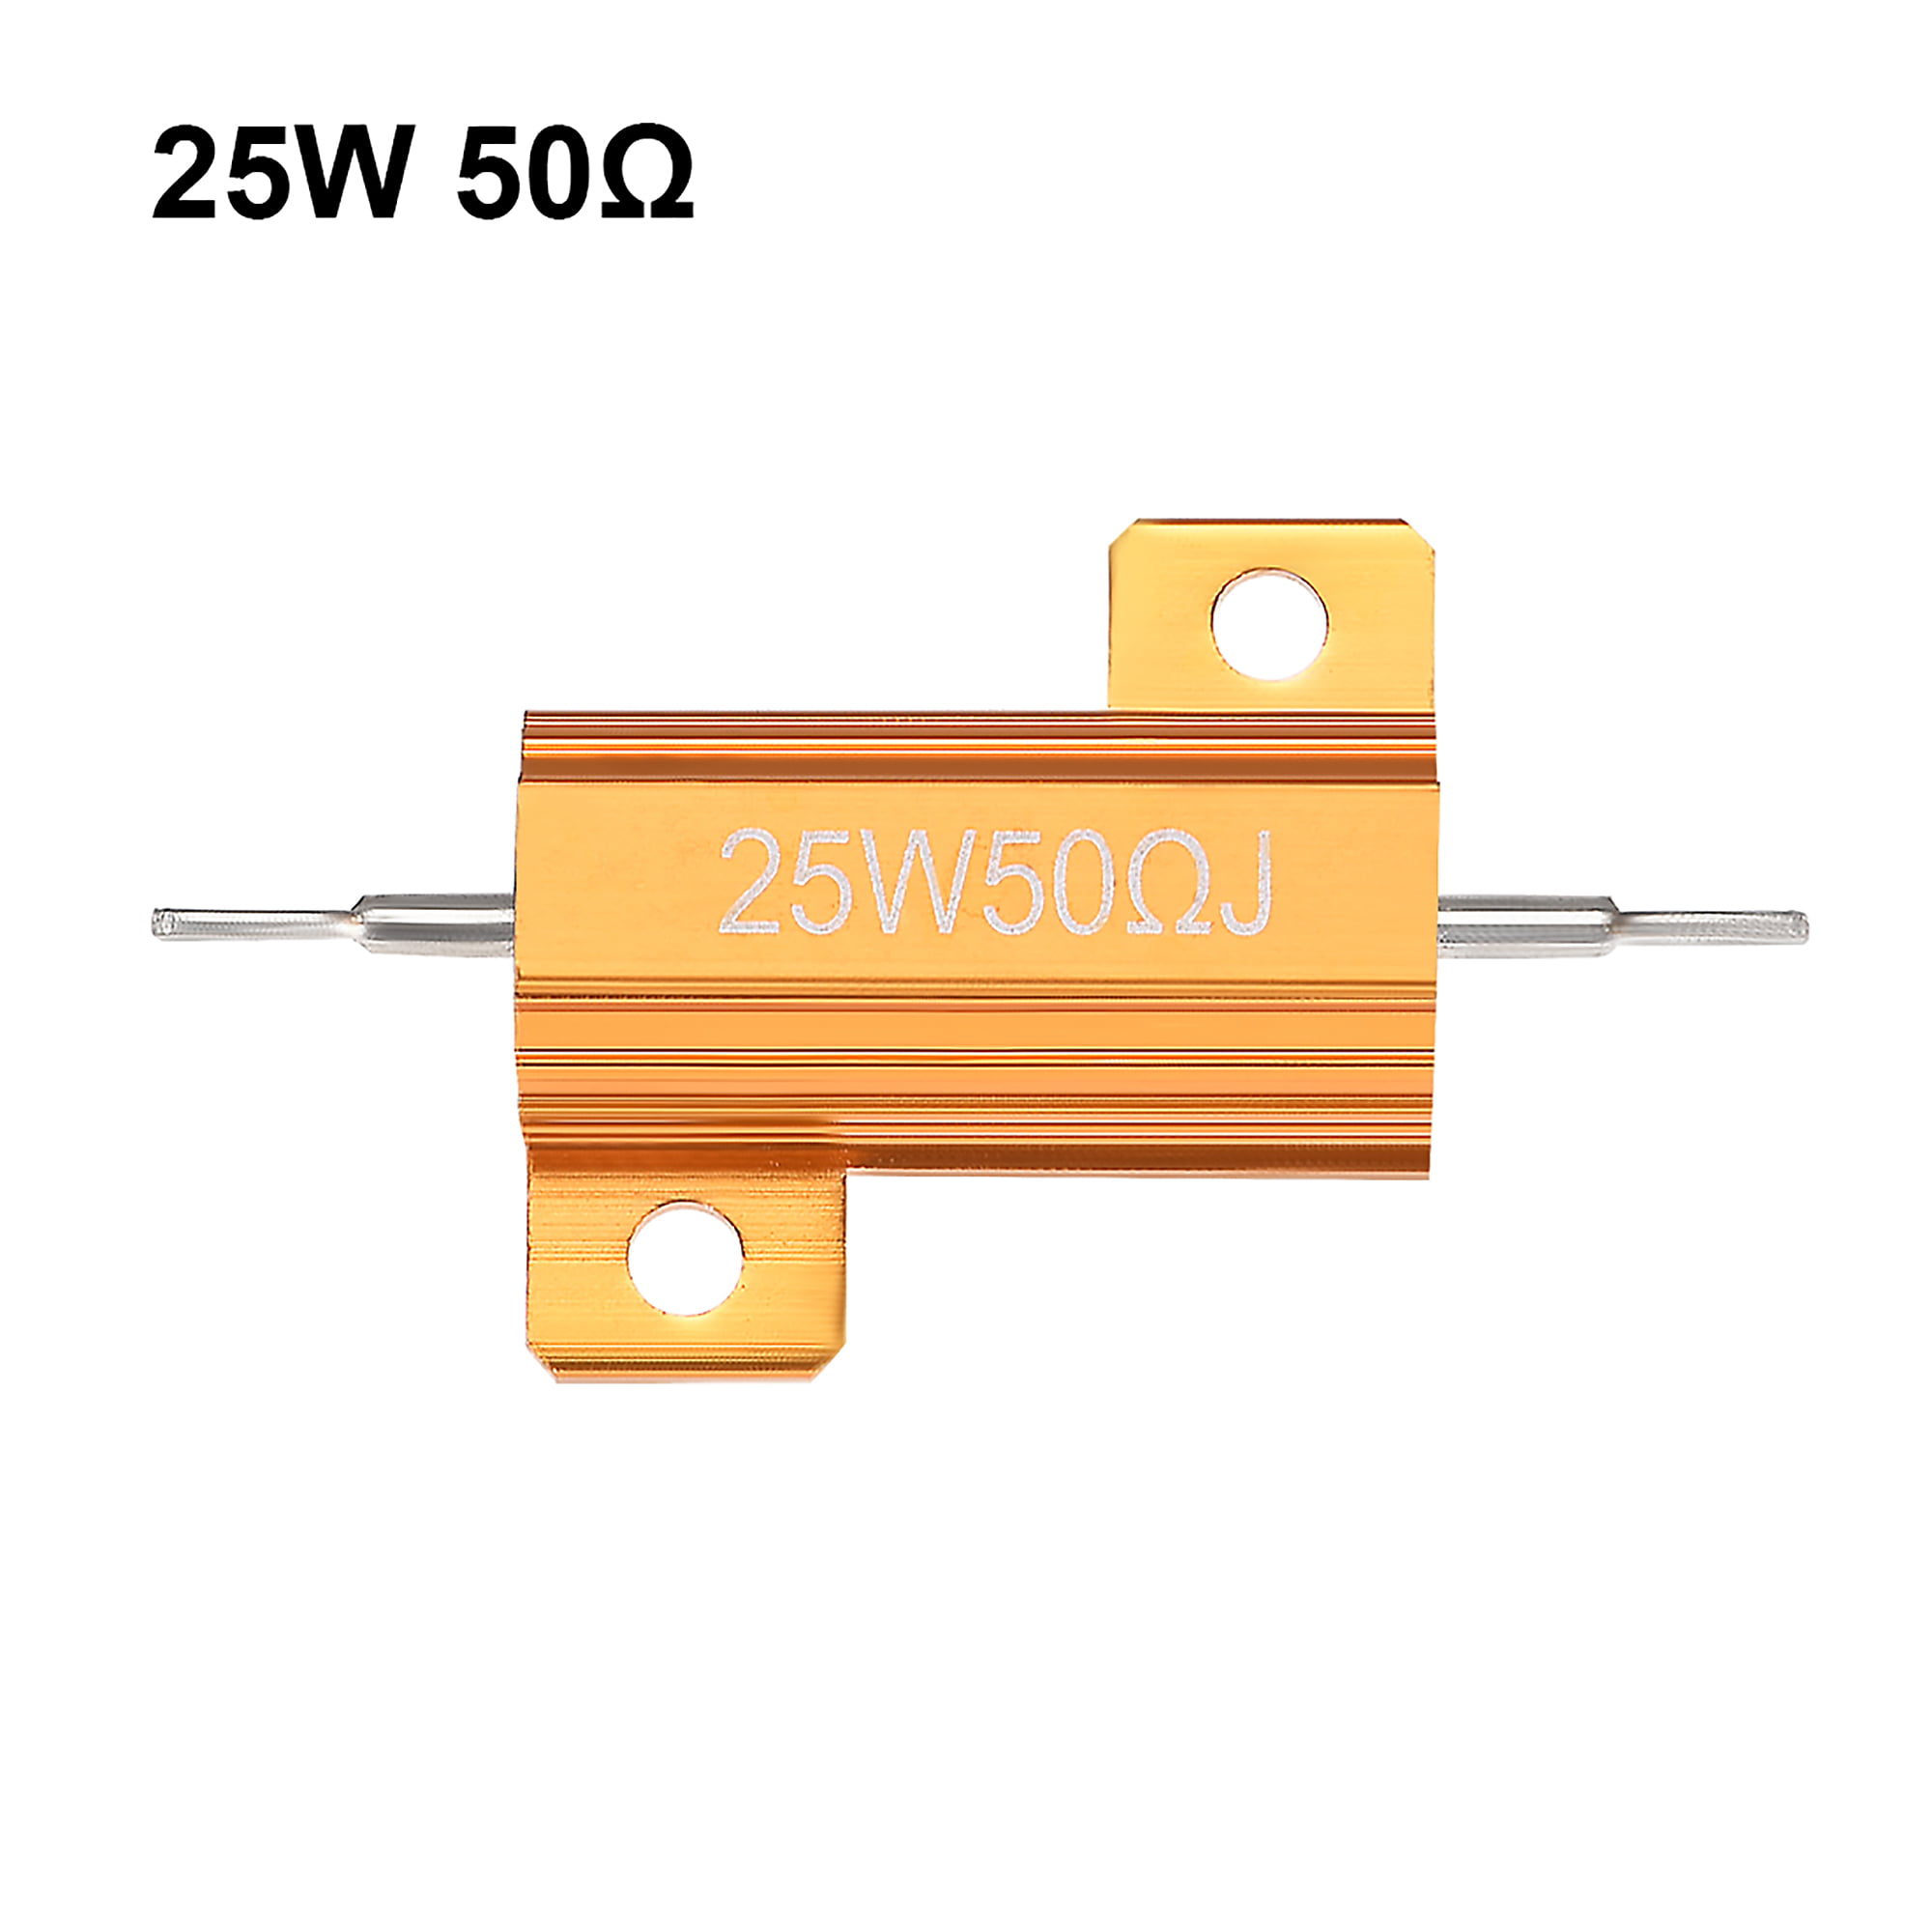 uxcell 25W 250 Ohm 5% Aluminum Housing Resistor Screw Tap Chassis Mounted Aluminum Case Wirewound Resistor Load Resistors Gold Tone 2 pcs